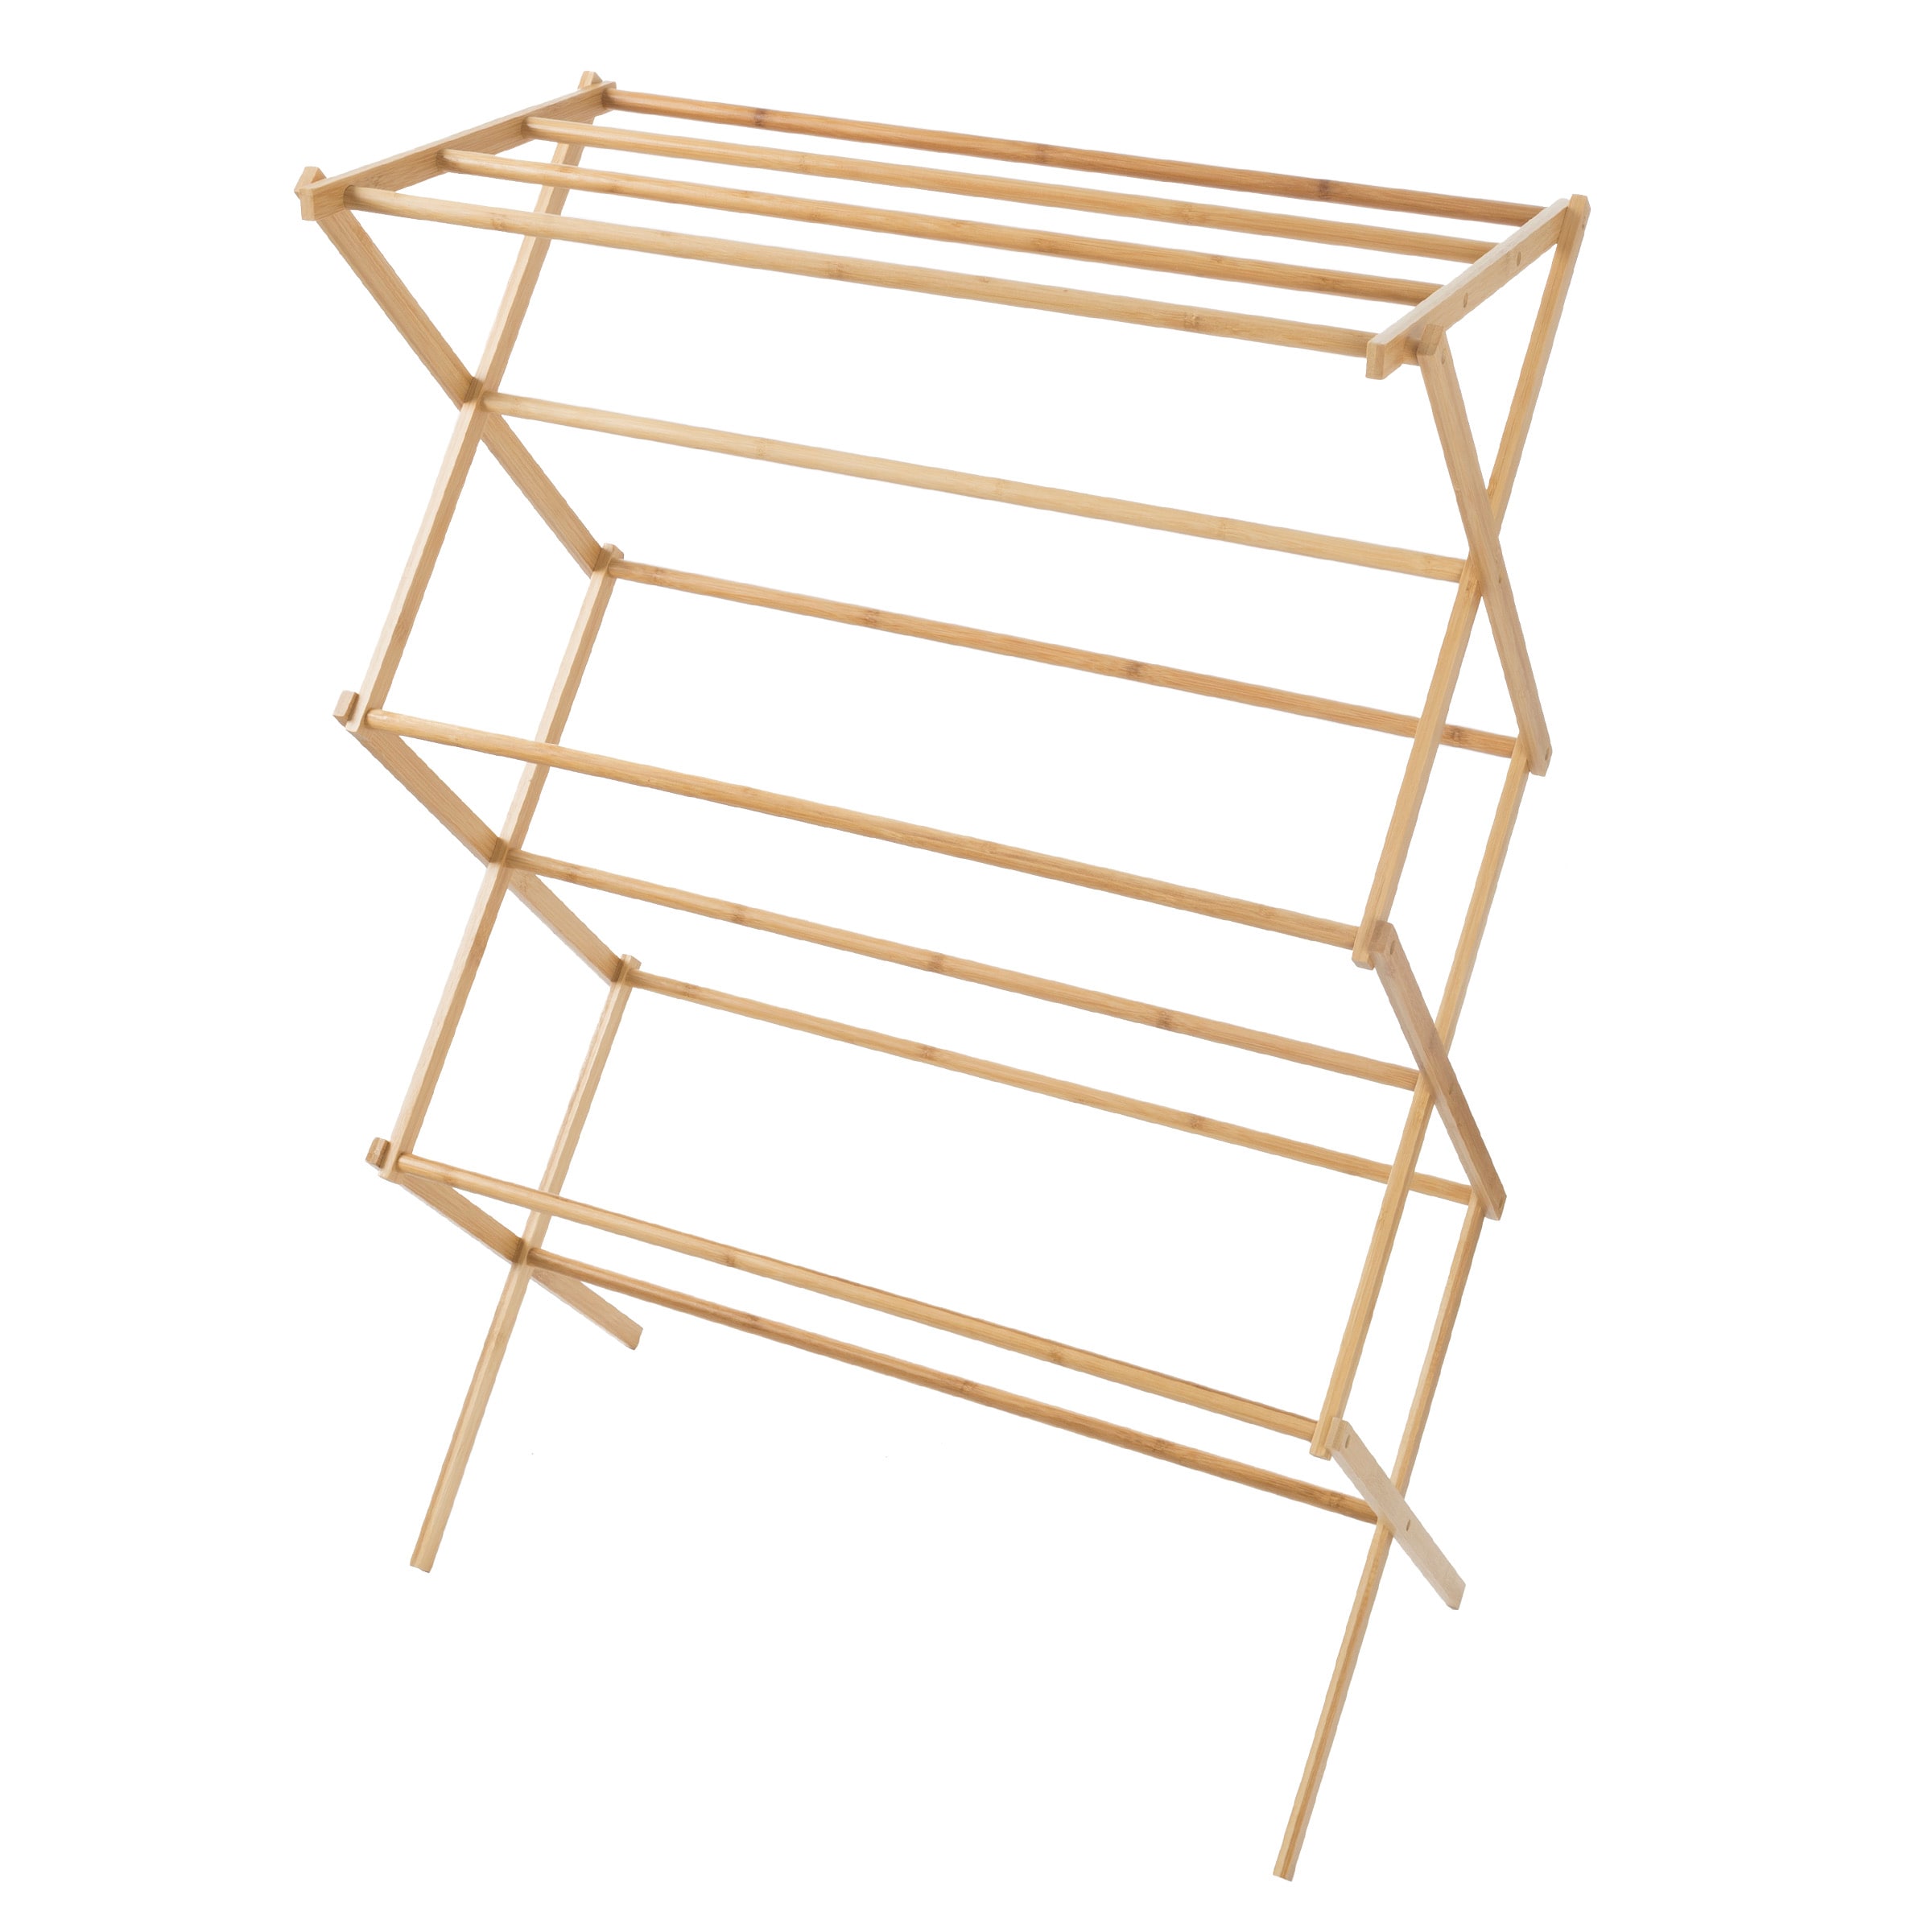 Enclave Expandable Drying Rack | Camping World